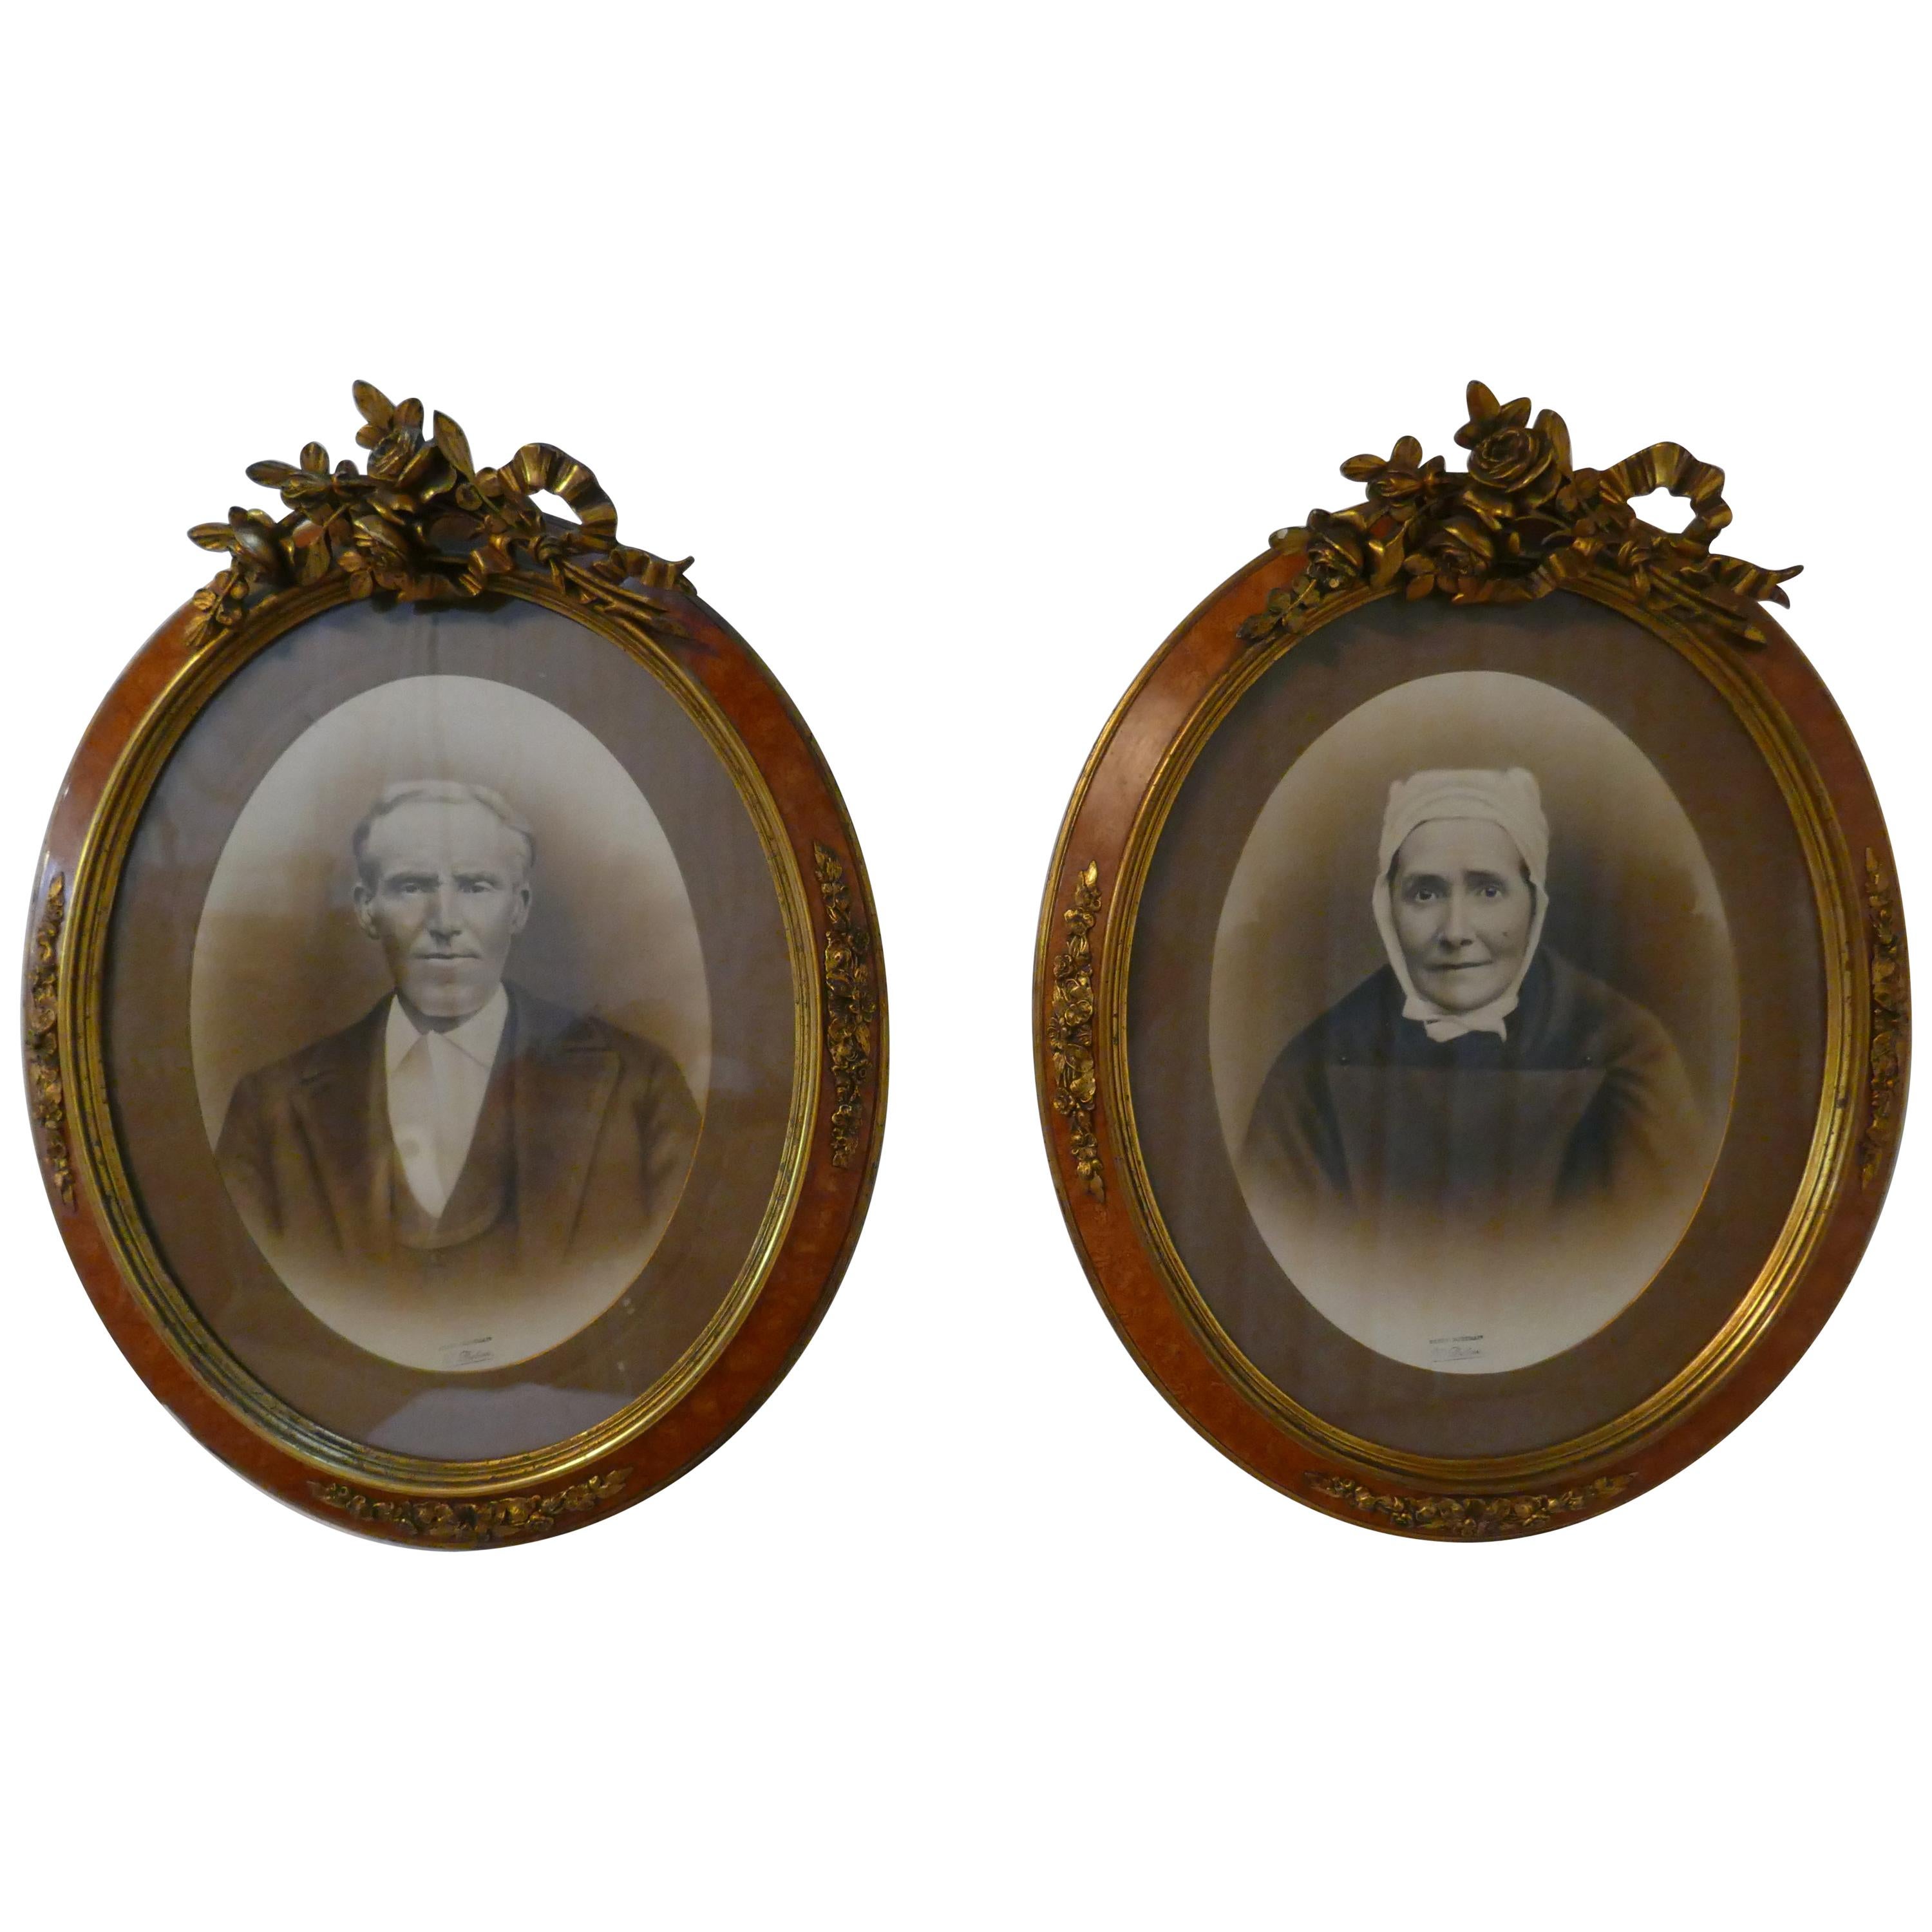 Pair of Large Portrait Photographs in Oval Ormolu Frames